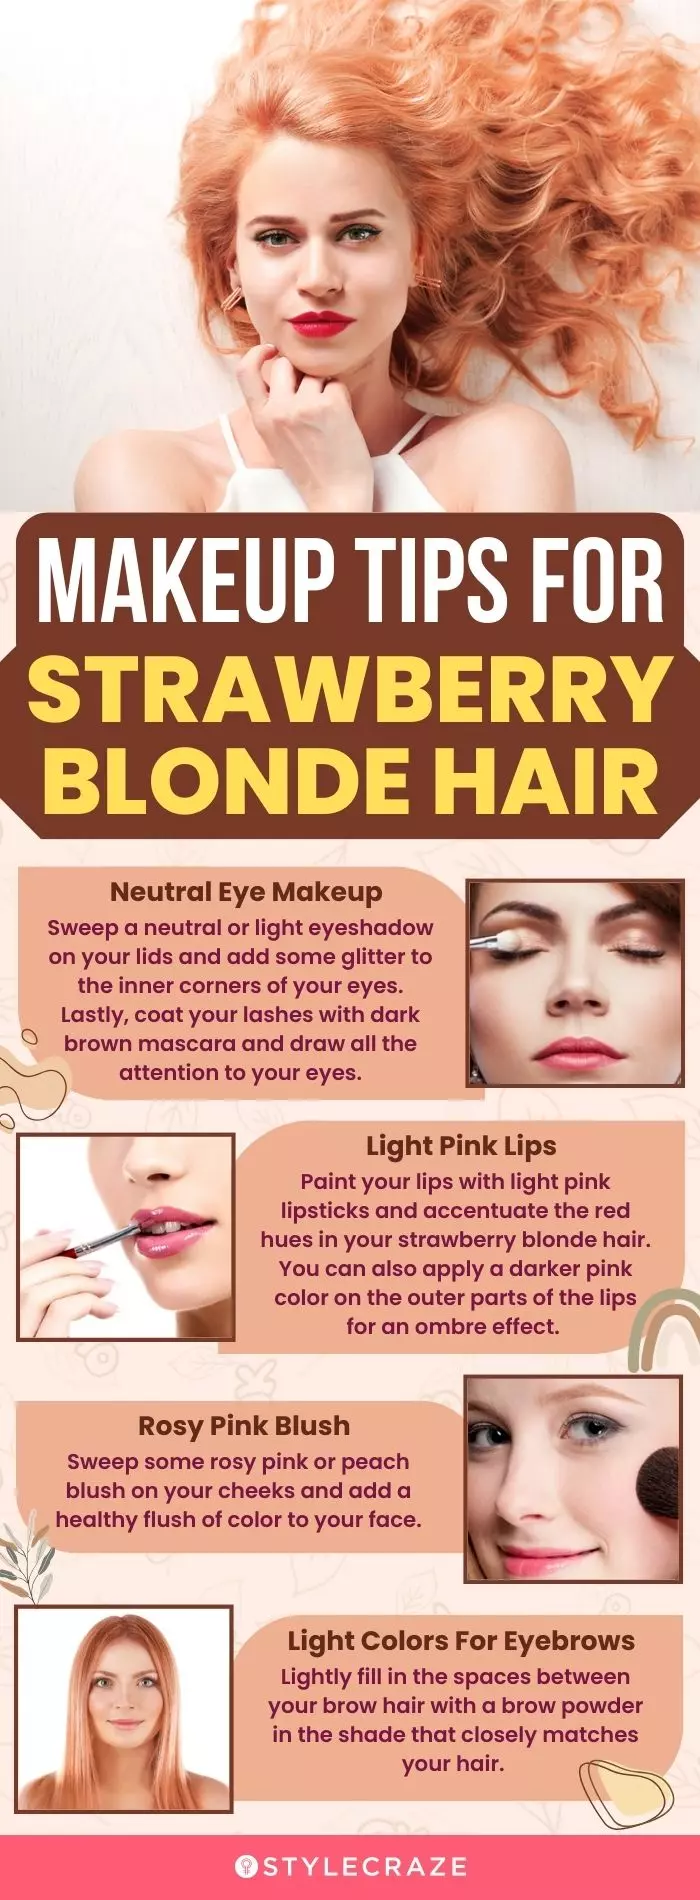 Makeup Tips For Strawberry Blonde Hair (infographic)